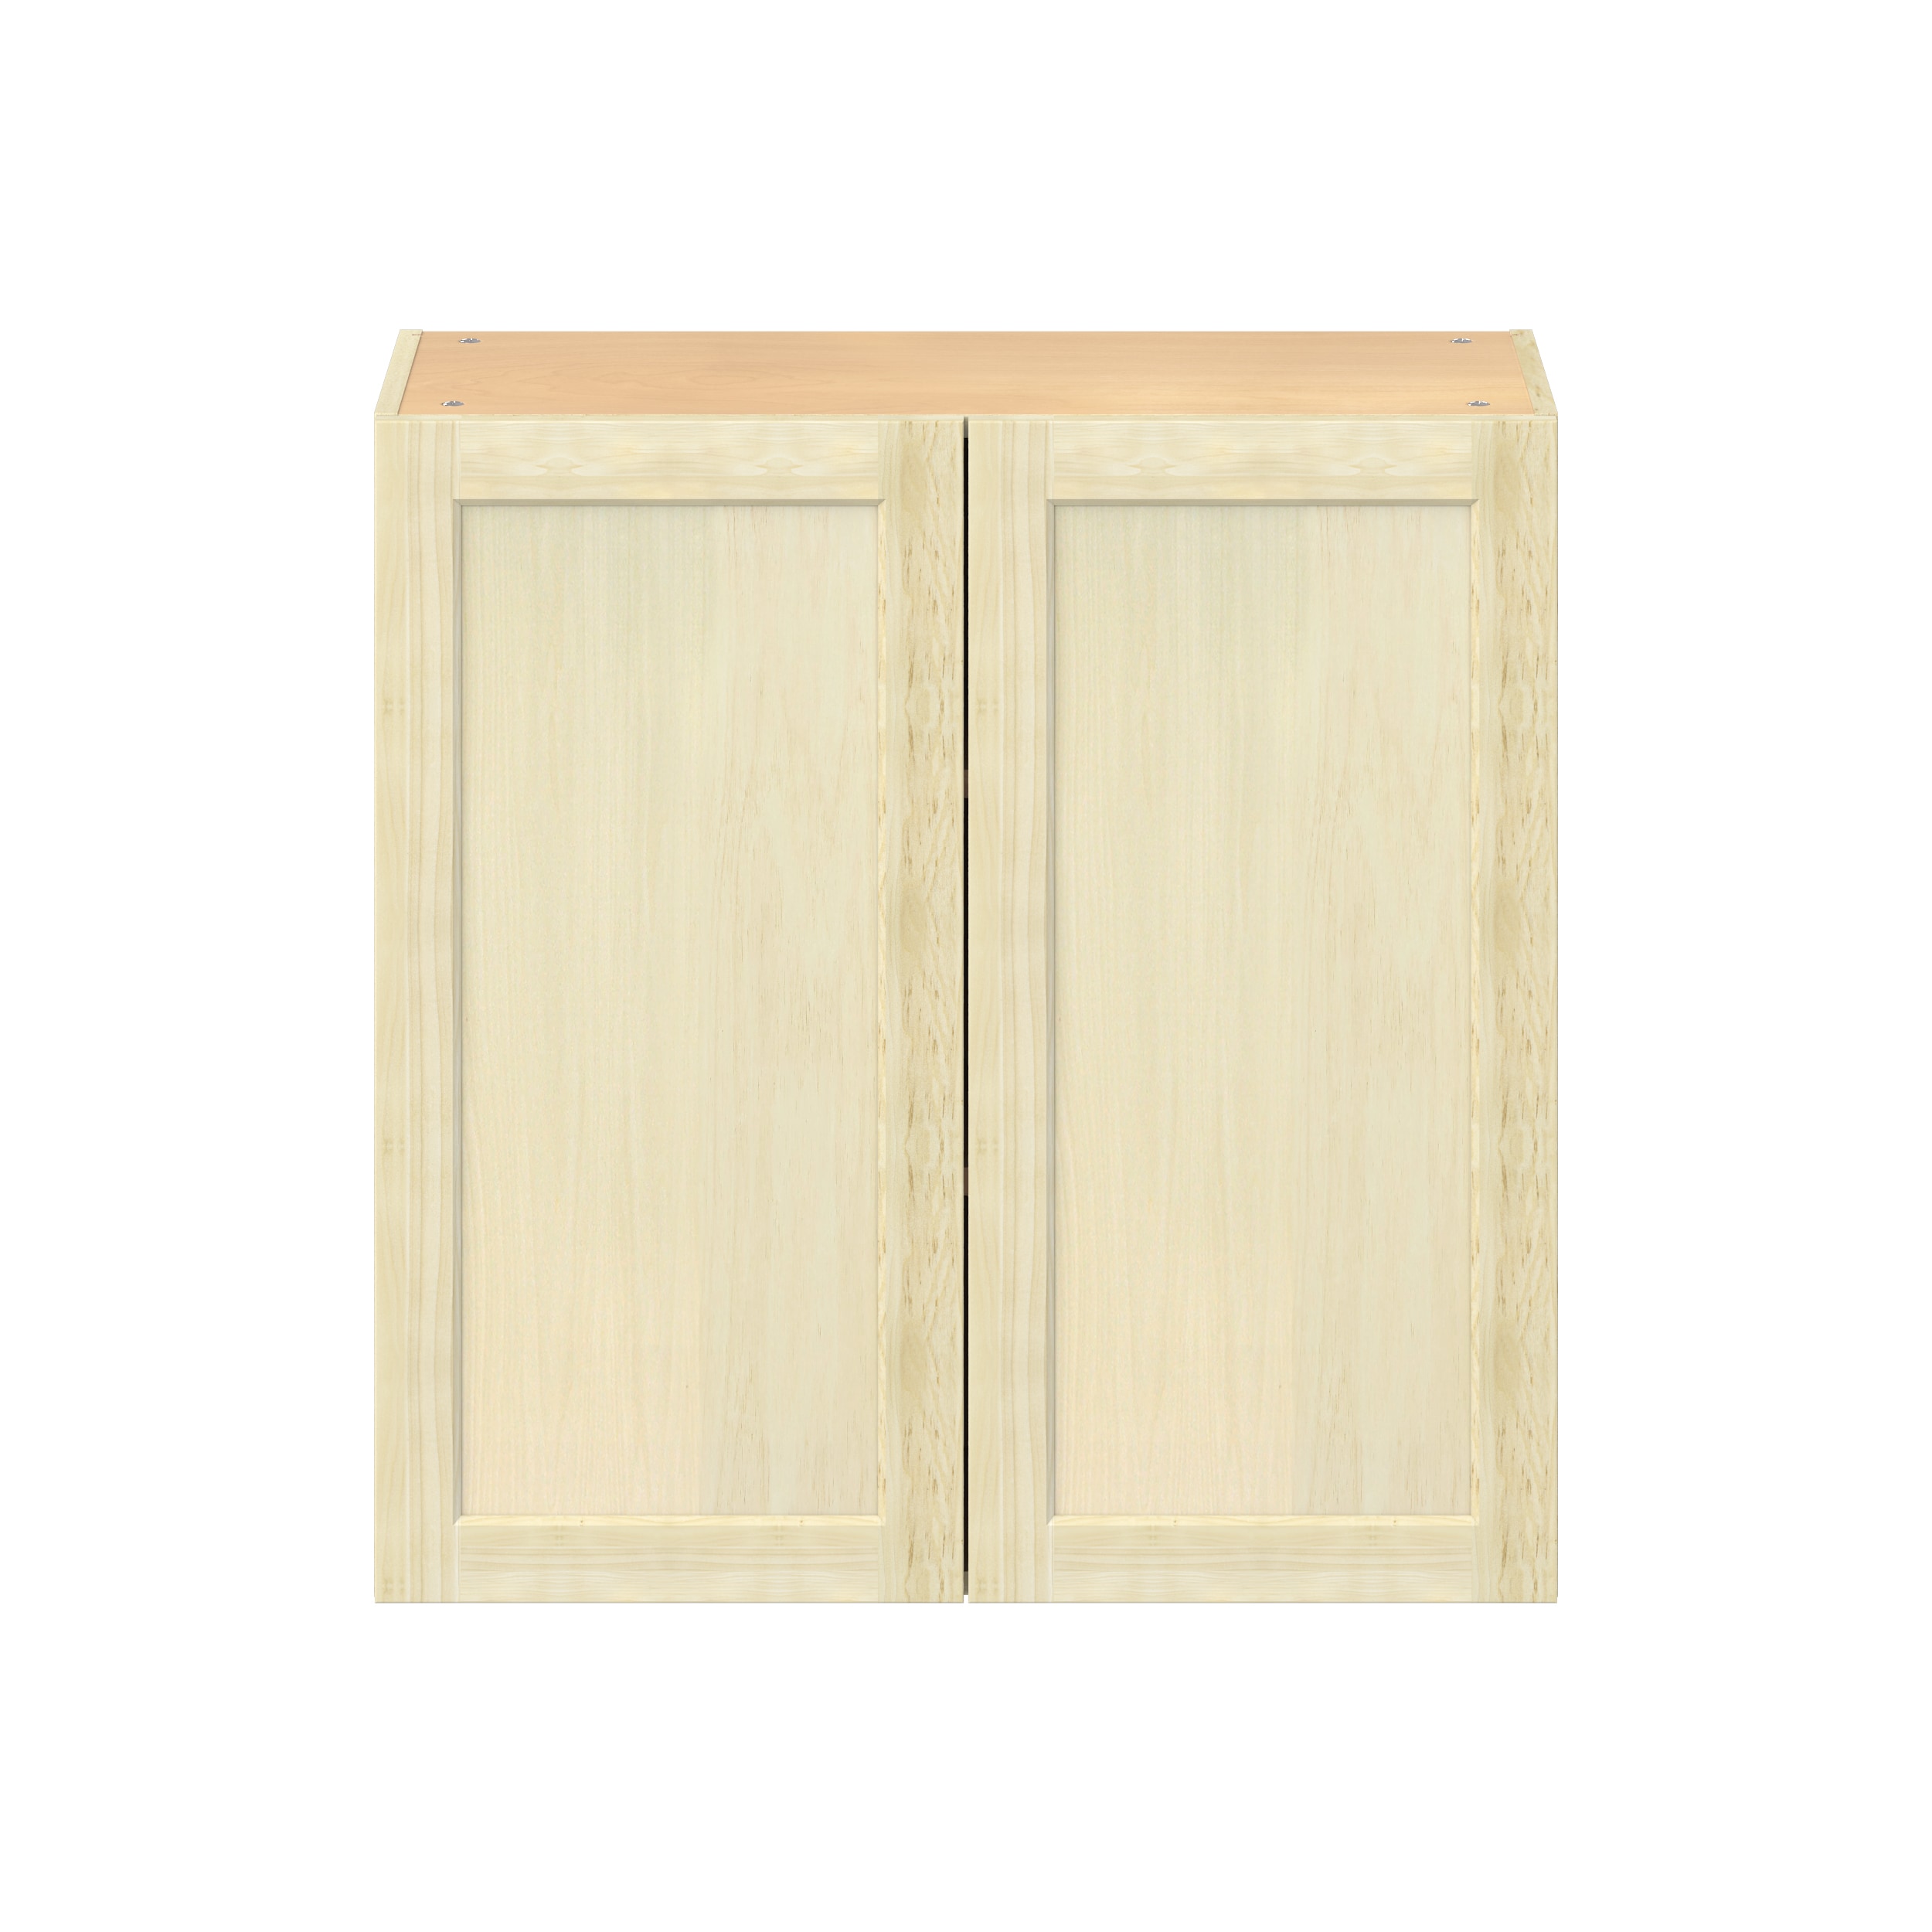 Berlioz Creations Prima PG8HPF Tall Kitchen Cabinet, 2 Doors, Structured  Ash 80 x 33.2 x 55.3 cm, 100% Made in France : : Home & Kitchen